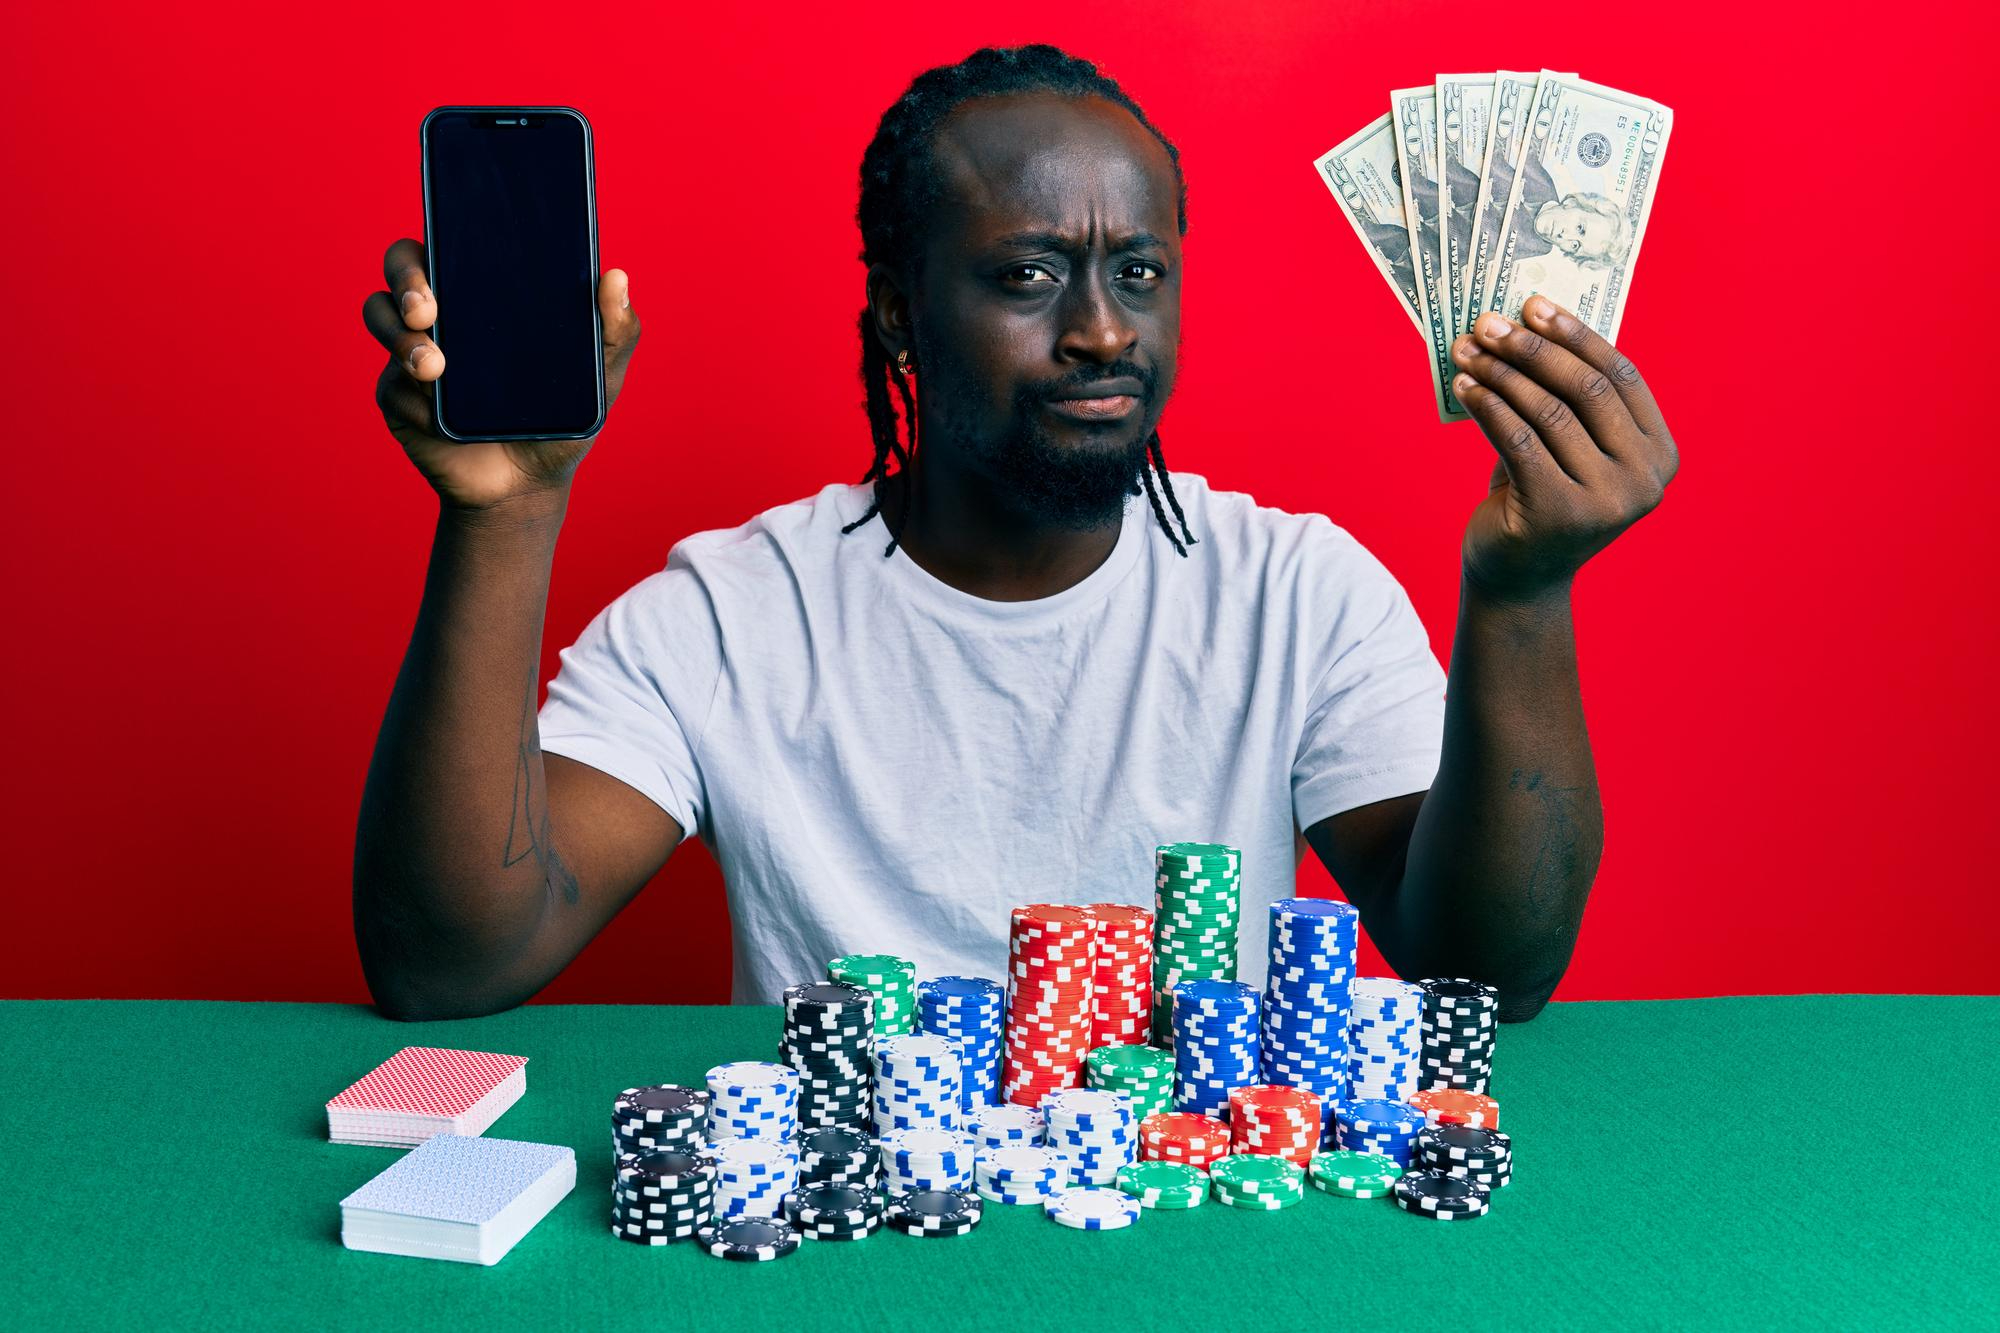 handsome-young-black-man-playing-poker-holding-smartphone-dollars-skeptic-nervous-frowning-upset-because-problem-negative-person